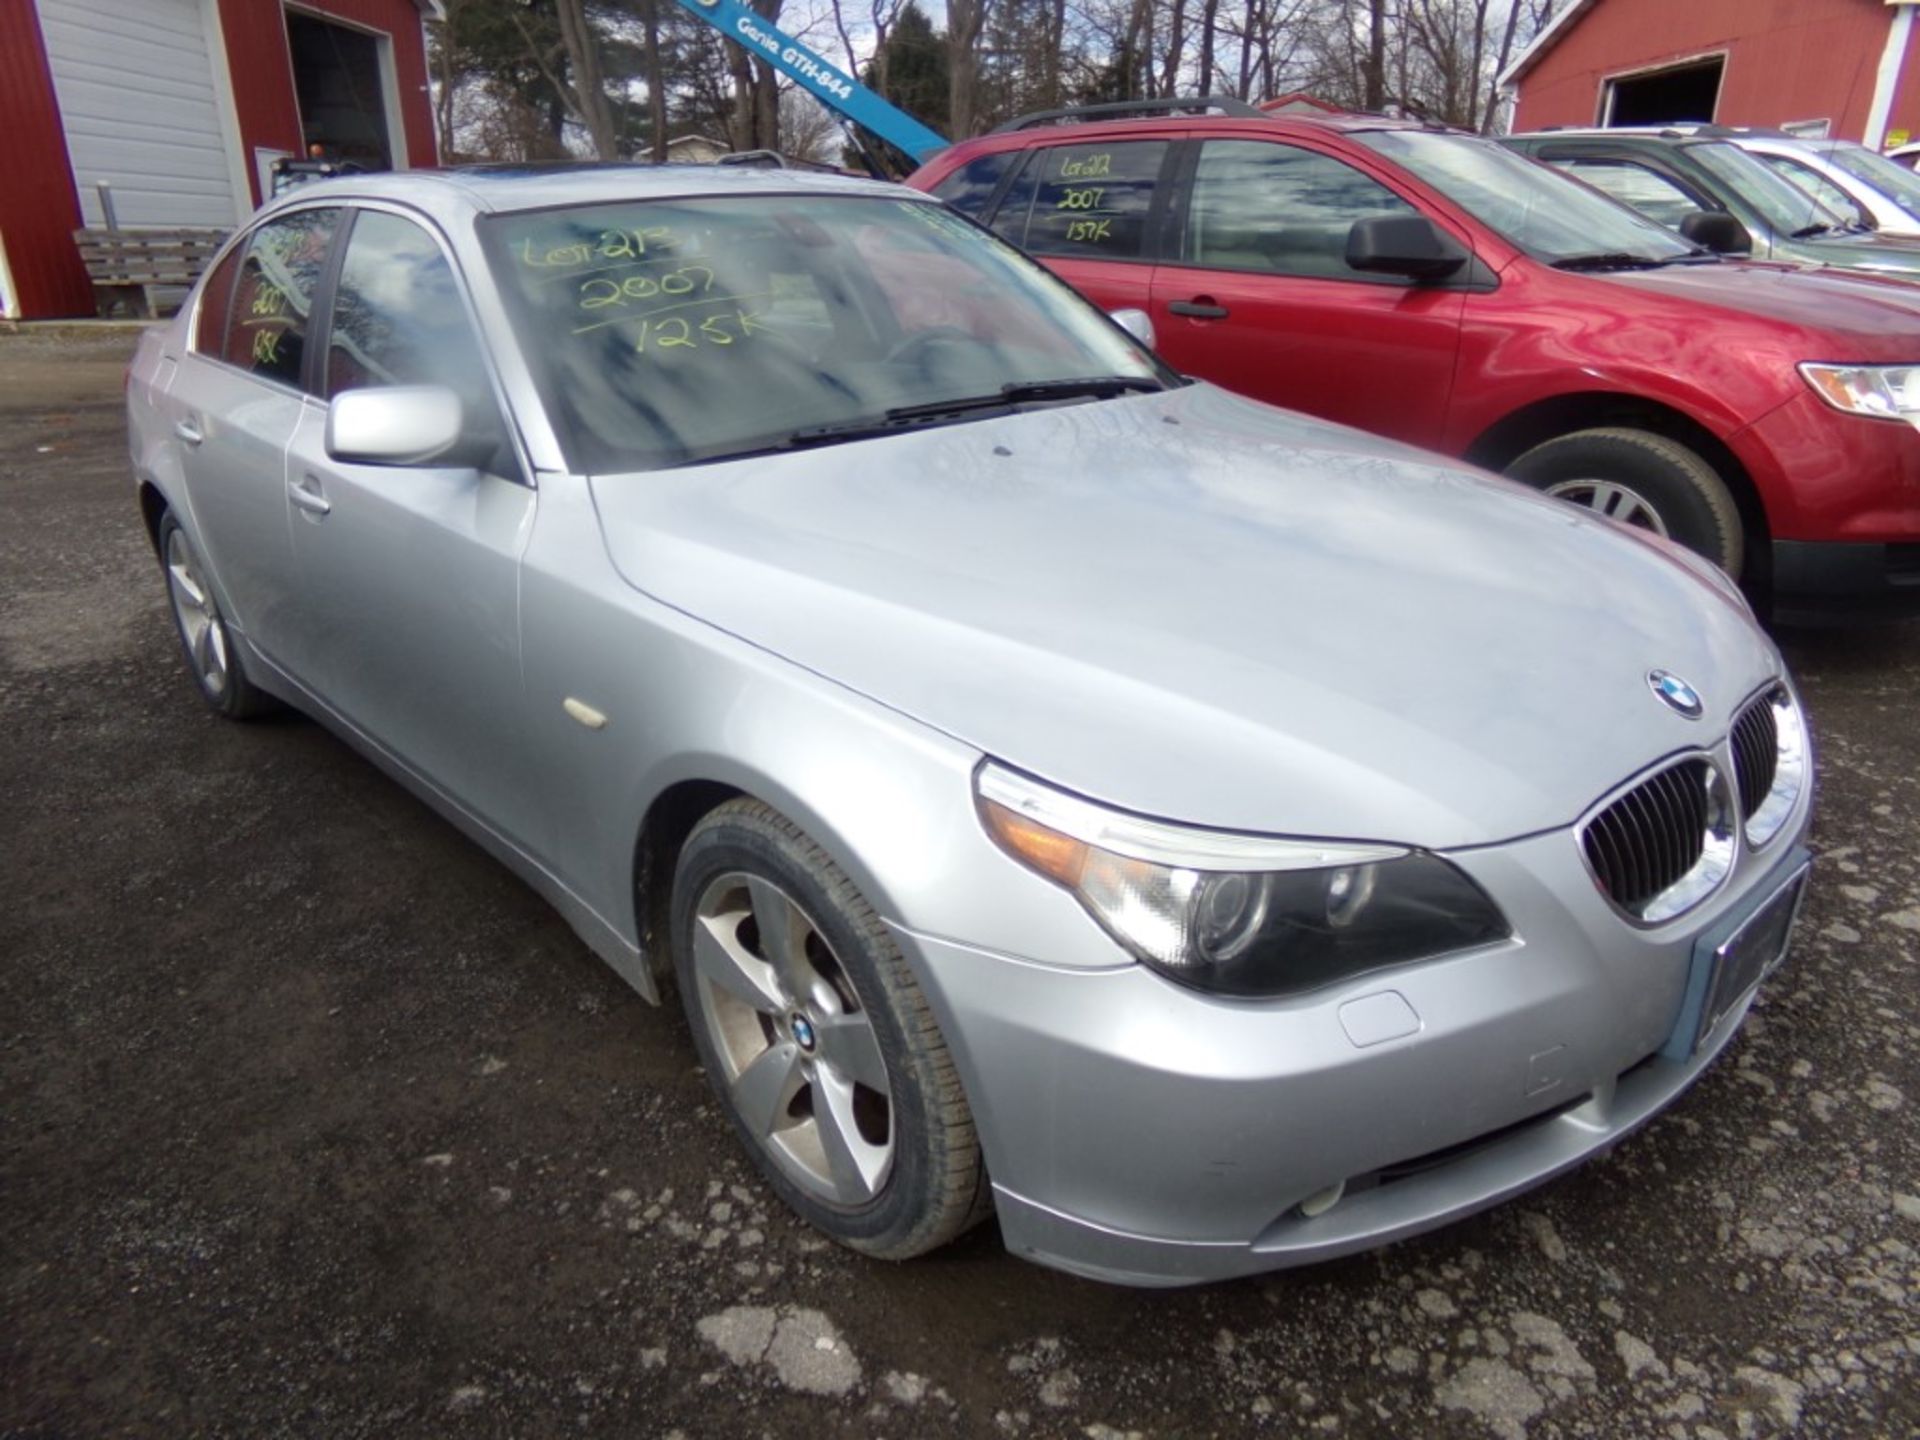 2007 BMW 530XI, AWD, Leather, Sunroof, Silver, 125,062 Miles, VIN#WBANF73557CU22632 - OPEN TO ALL - Bild 4 aus 7